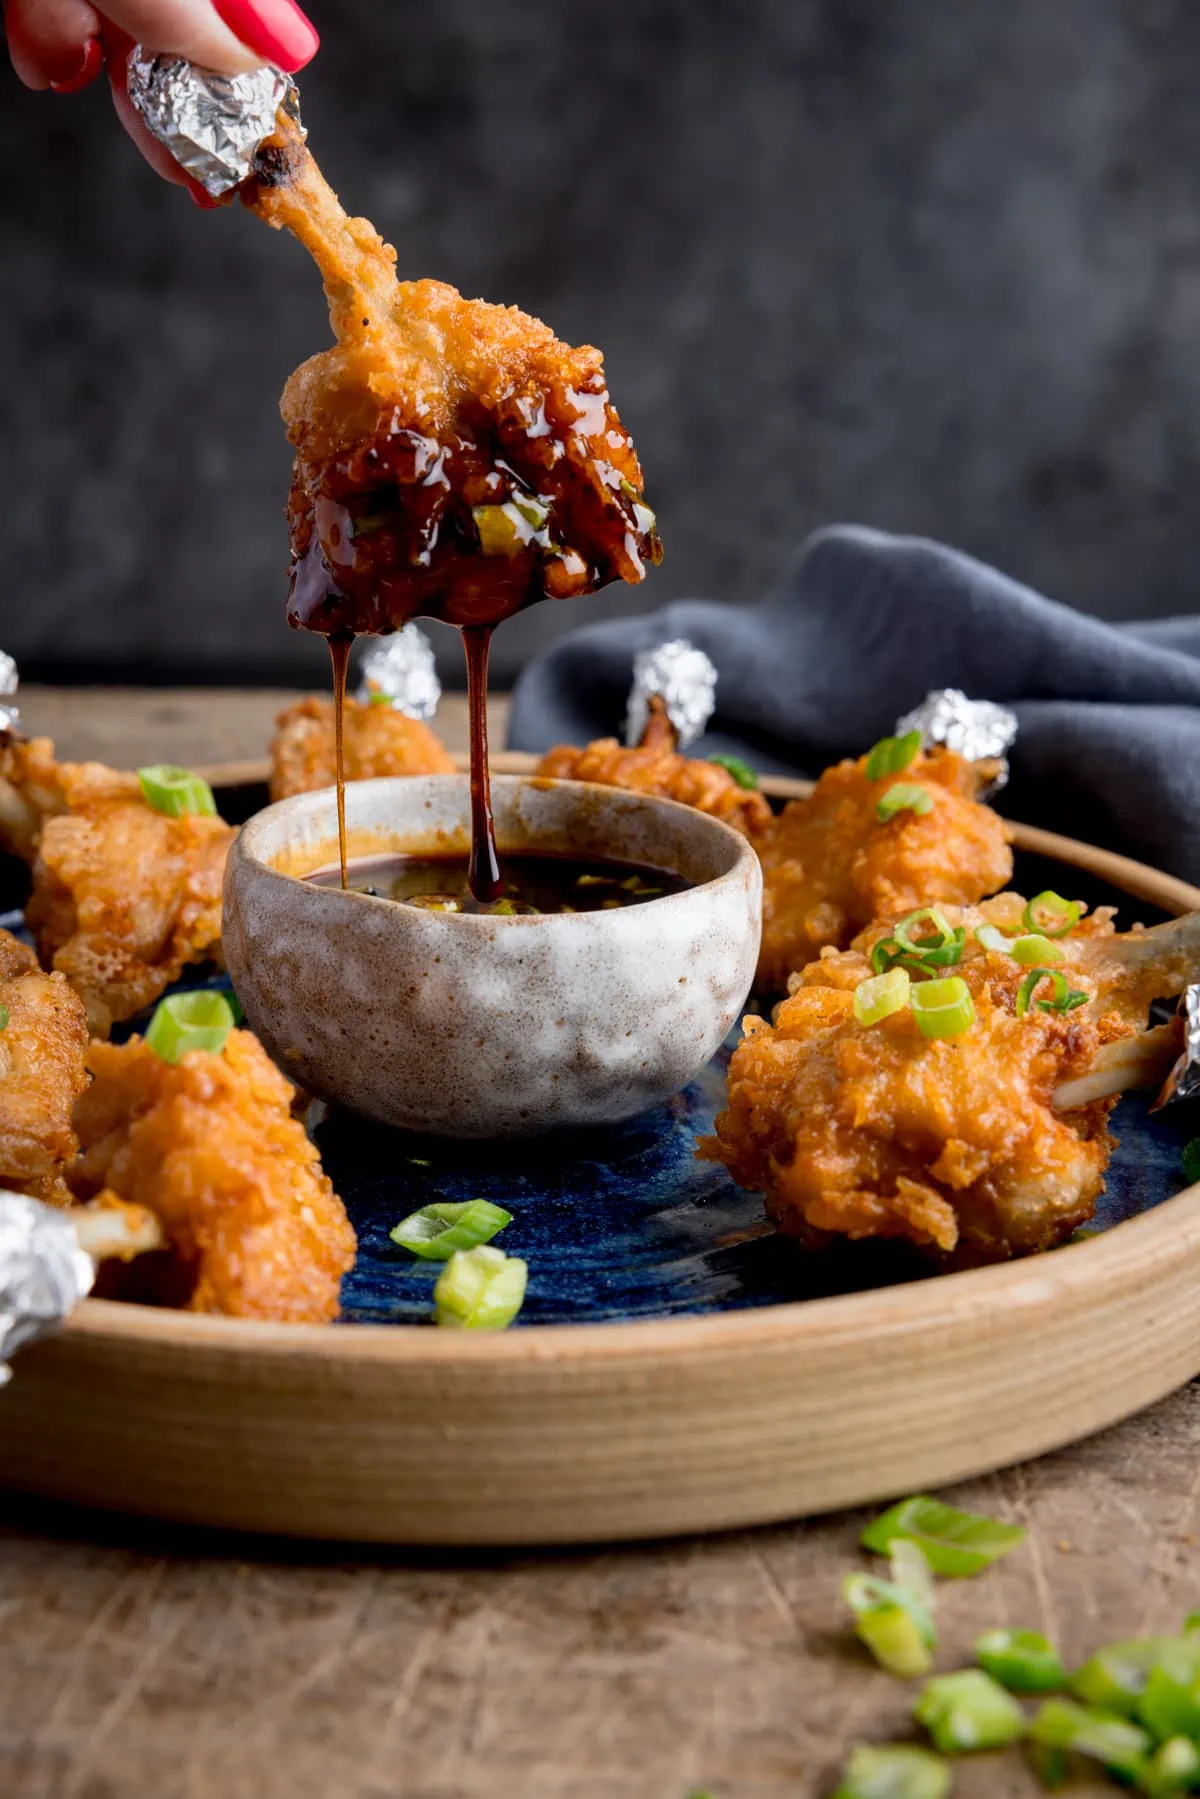 A plate of chicken lollipops with a bowl of spicy dipping sauce. on a wooden table. One of the wings is being dipped into the sauce and is dripping. The wing is being held by fingers with pink-painted fingernails.